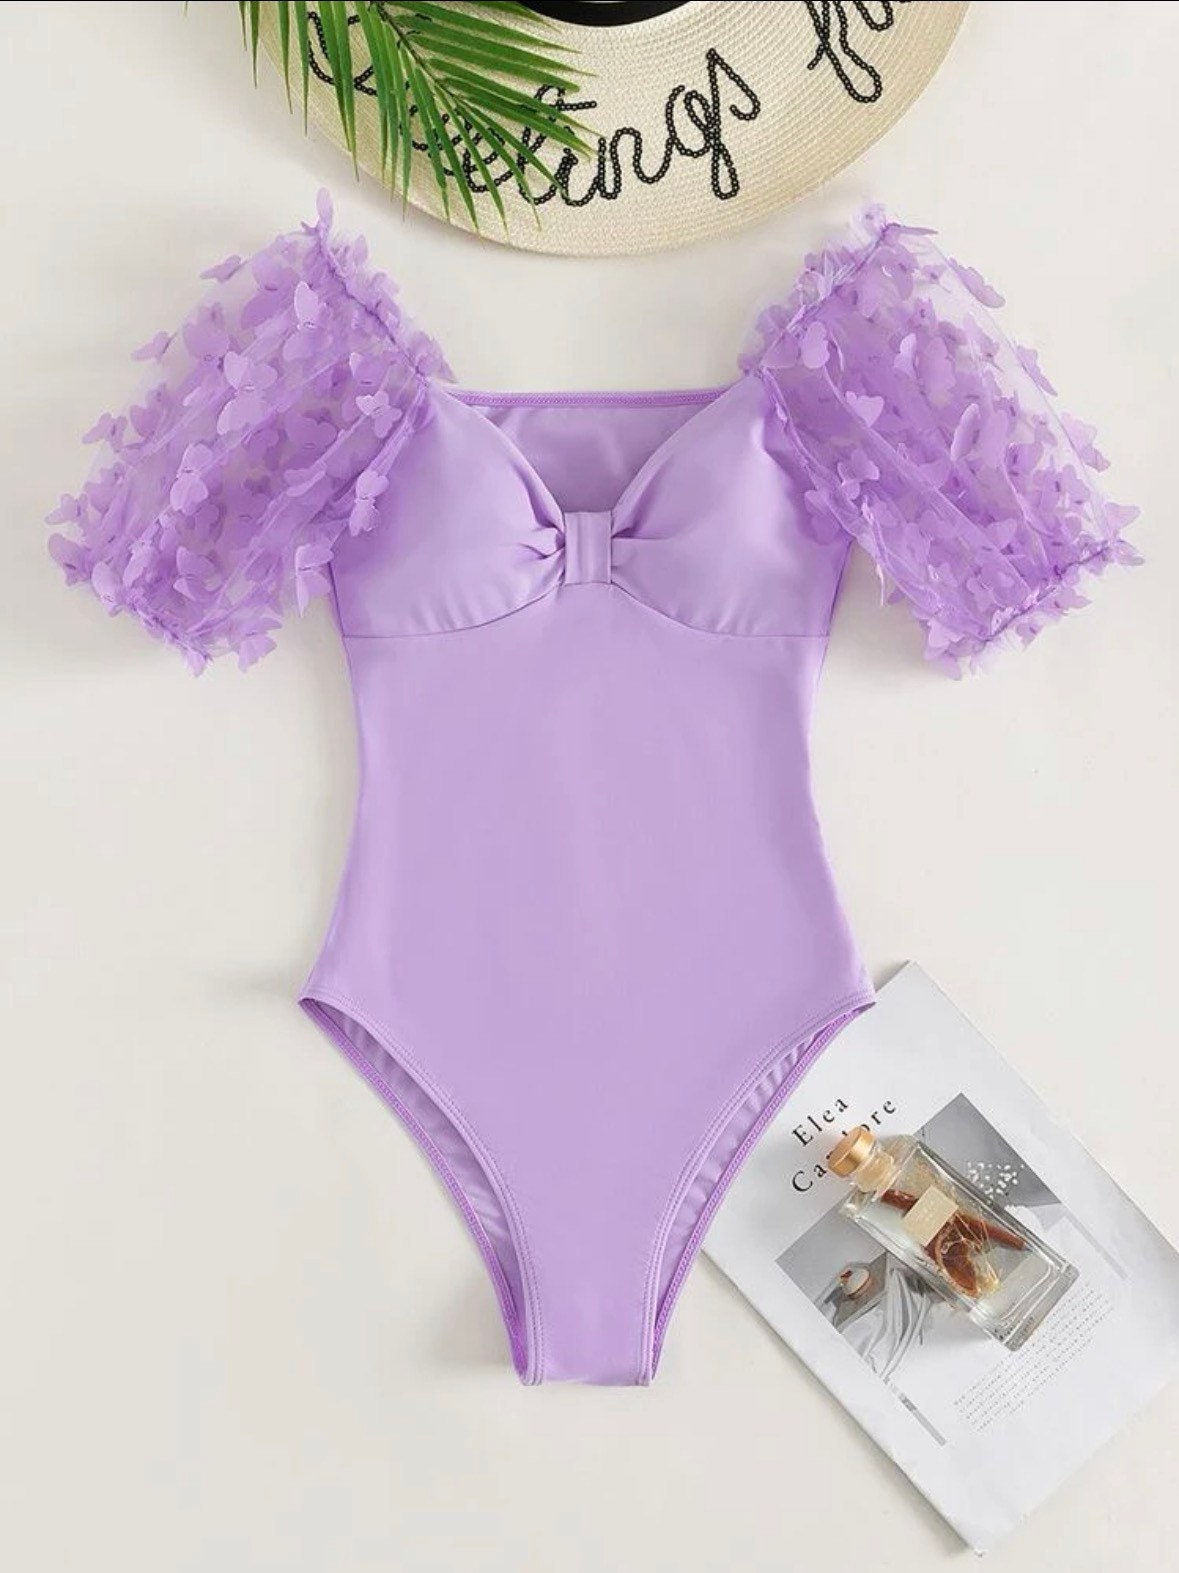 The Beautiful Butterfly Shoulder One Piece Swimsuit with an elegant wireless ruched detail cutout halter one piece swimsuit